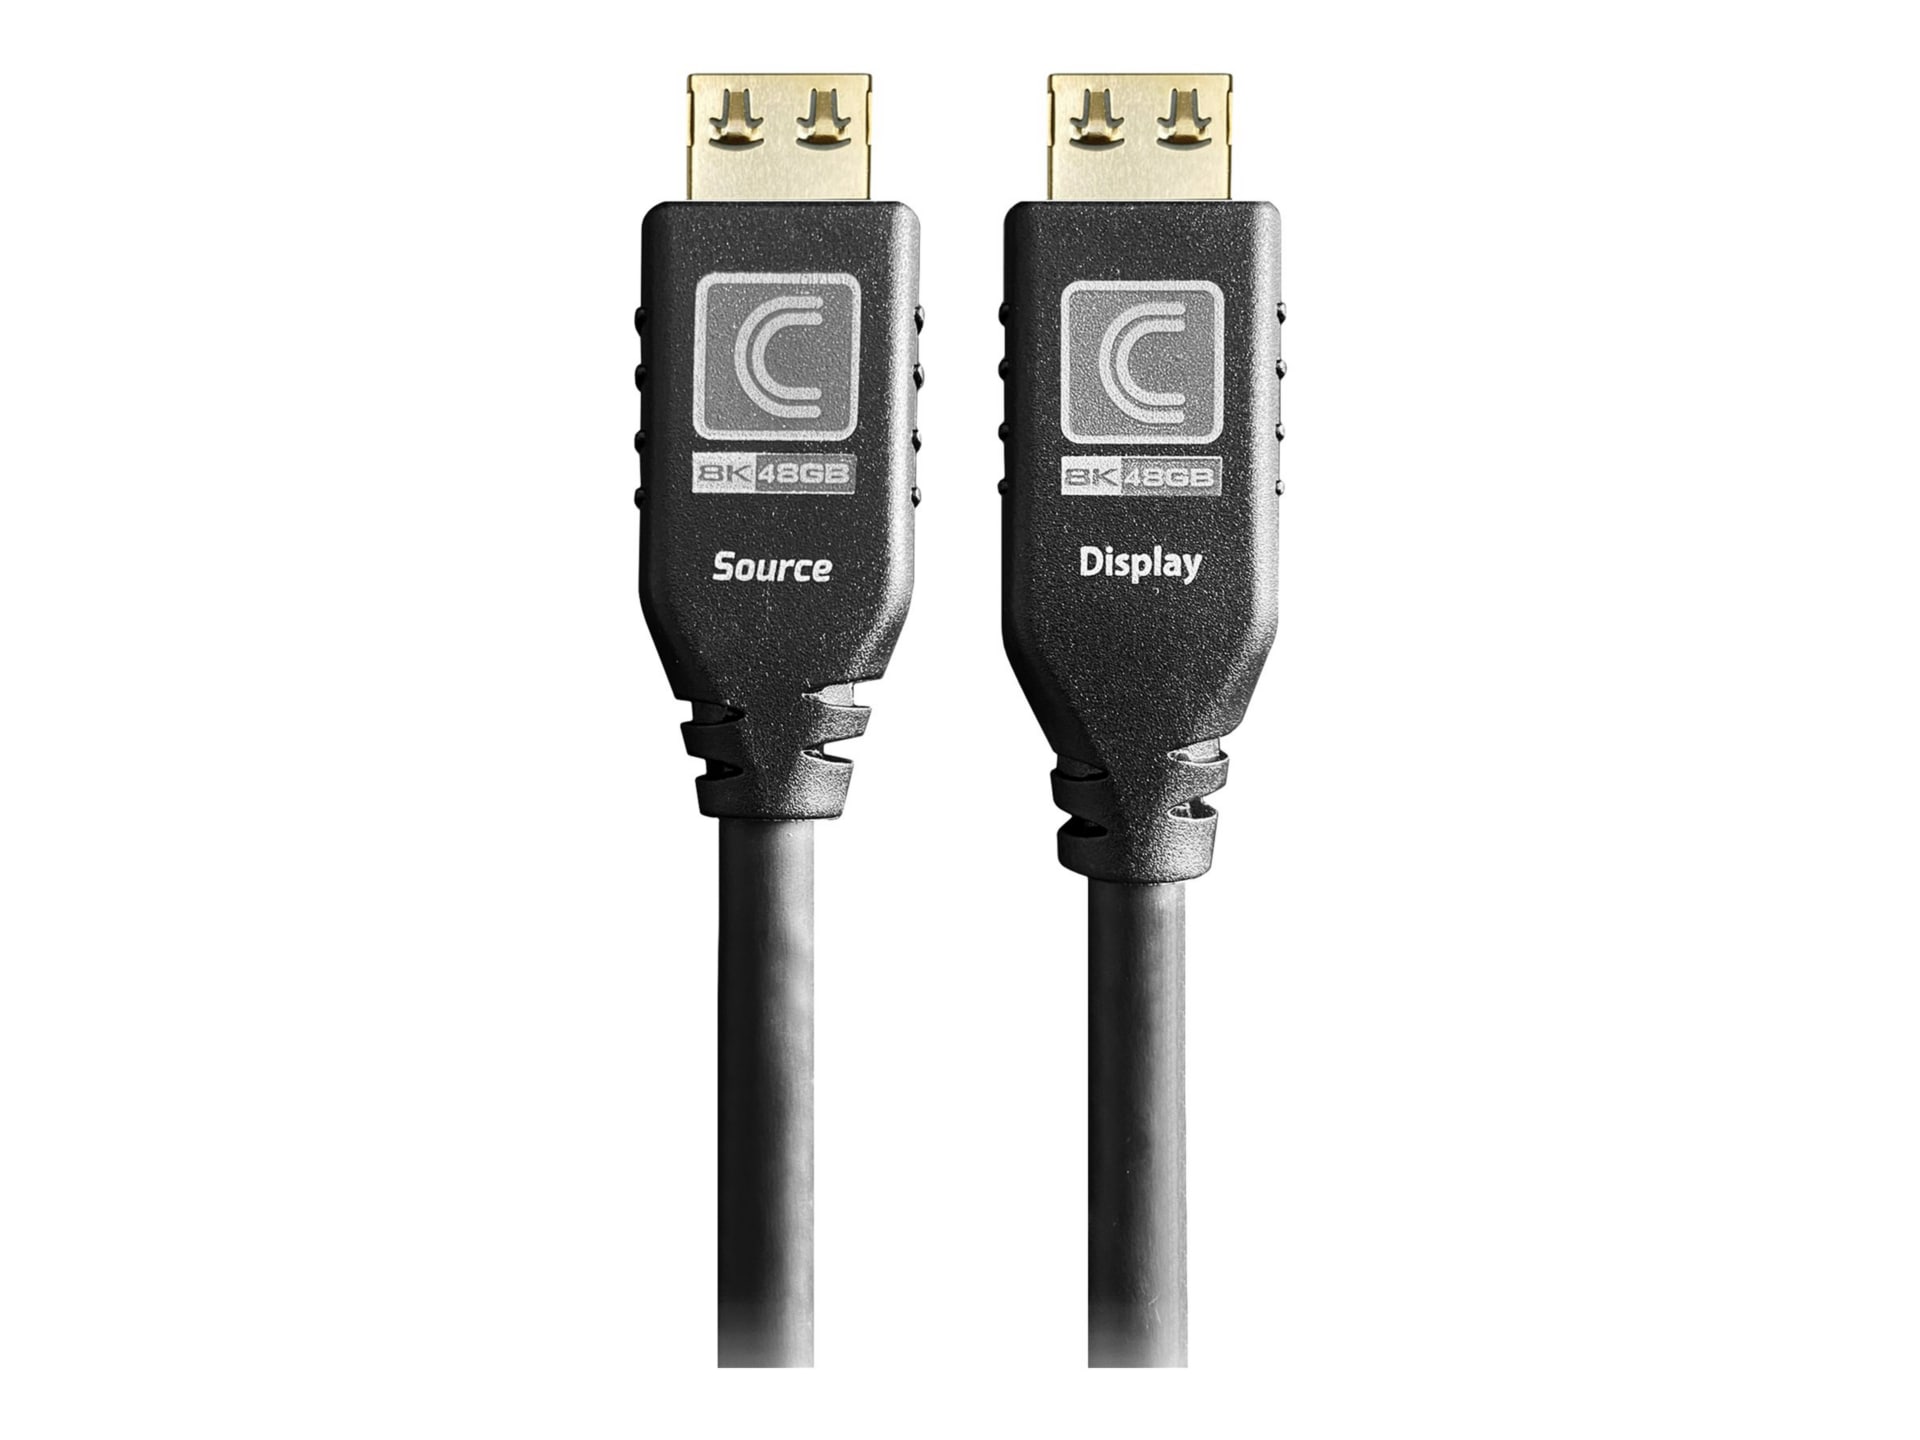 Comprehensive Microflex Pro AV/IT Integrator Series HDMI cable with Etherne